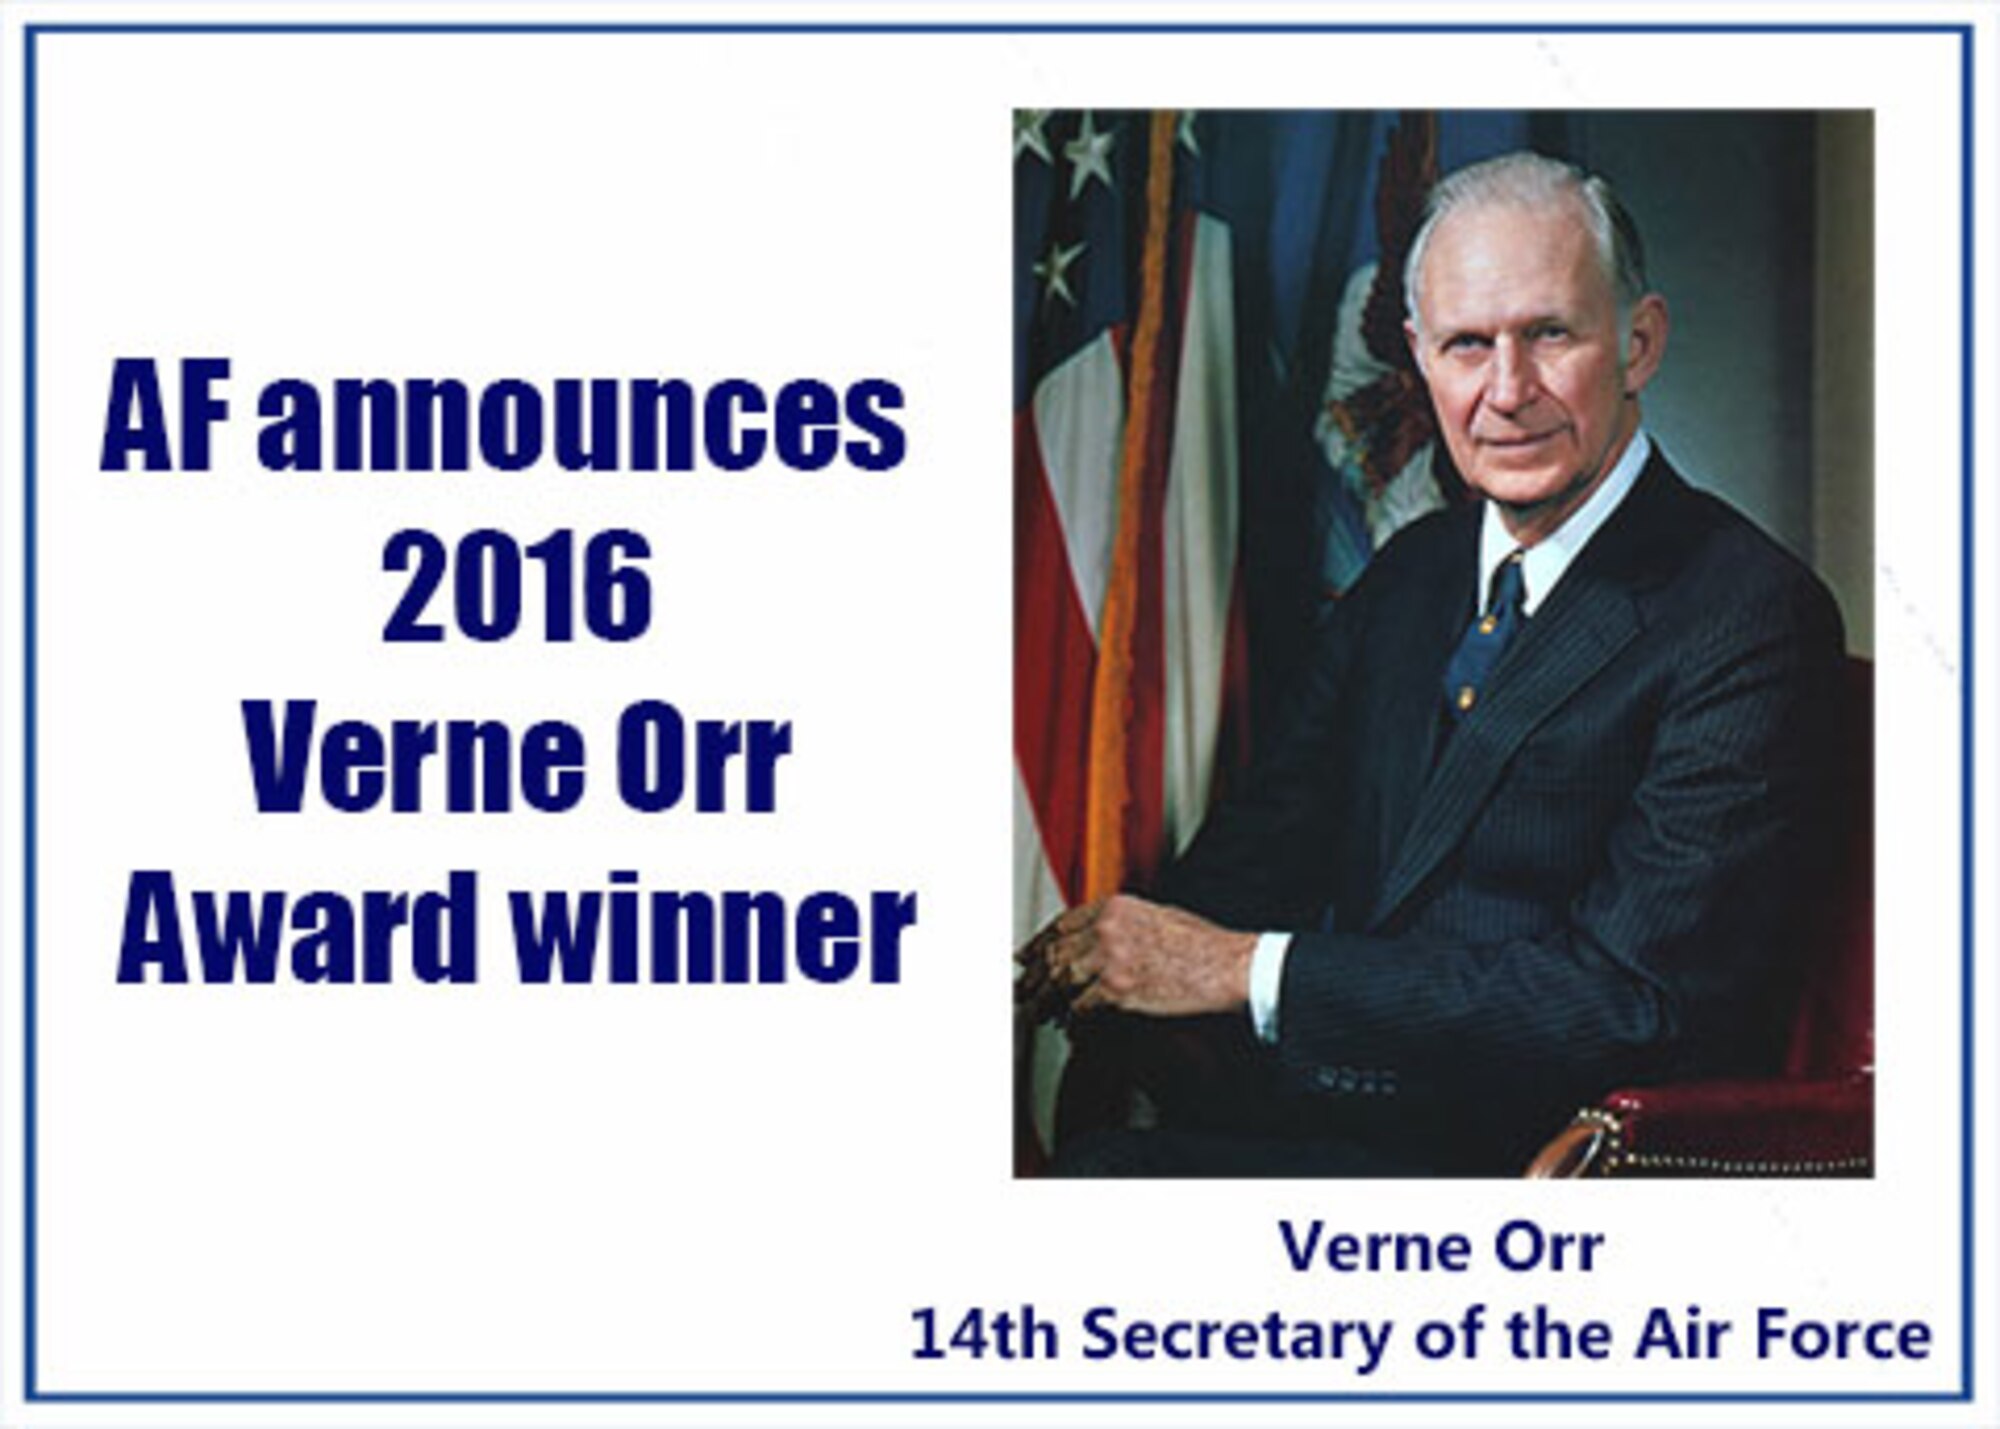 305th APS, Joint Base McGuire-Dix-Lakehurst, New Jersey, is the 2016 winner of the Verne Orr Award, which recognizes a Total Force Air Force unit that makes the most effective use of its human resources. (AFPC courtesy graphic).